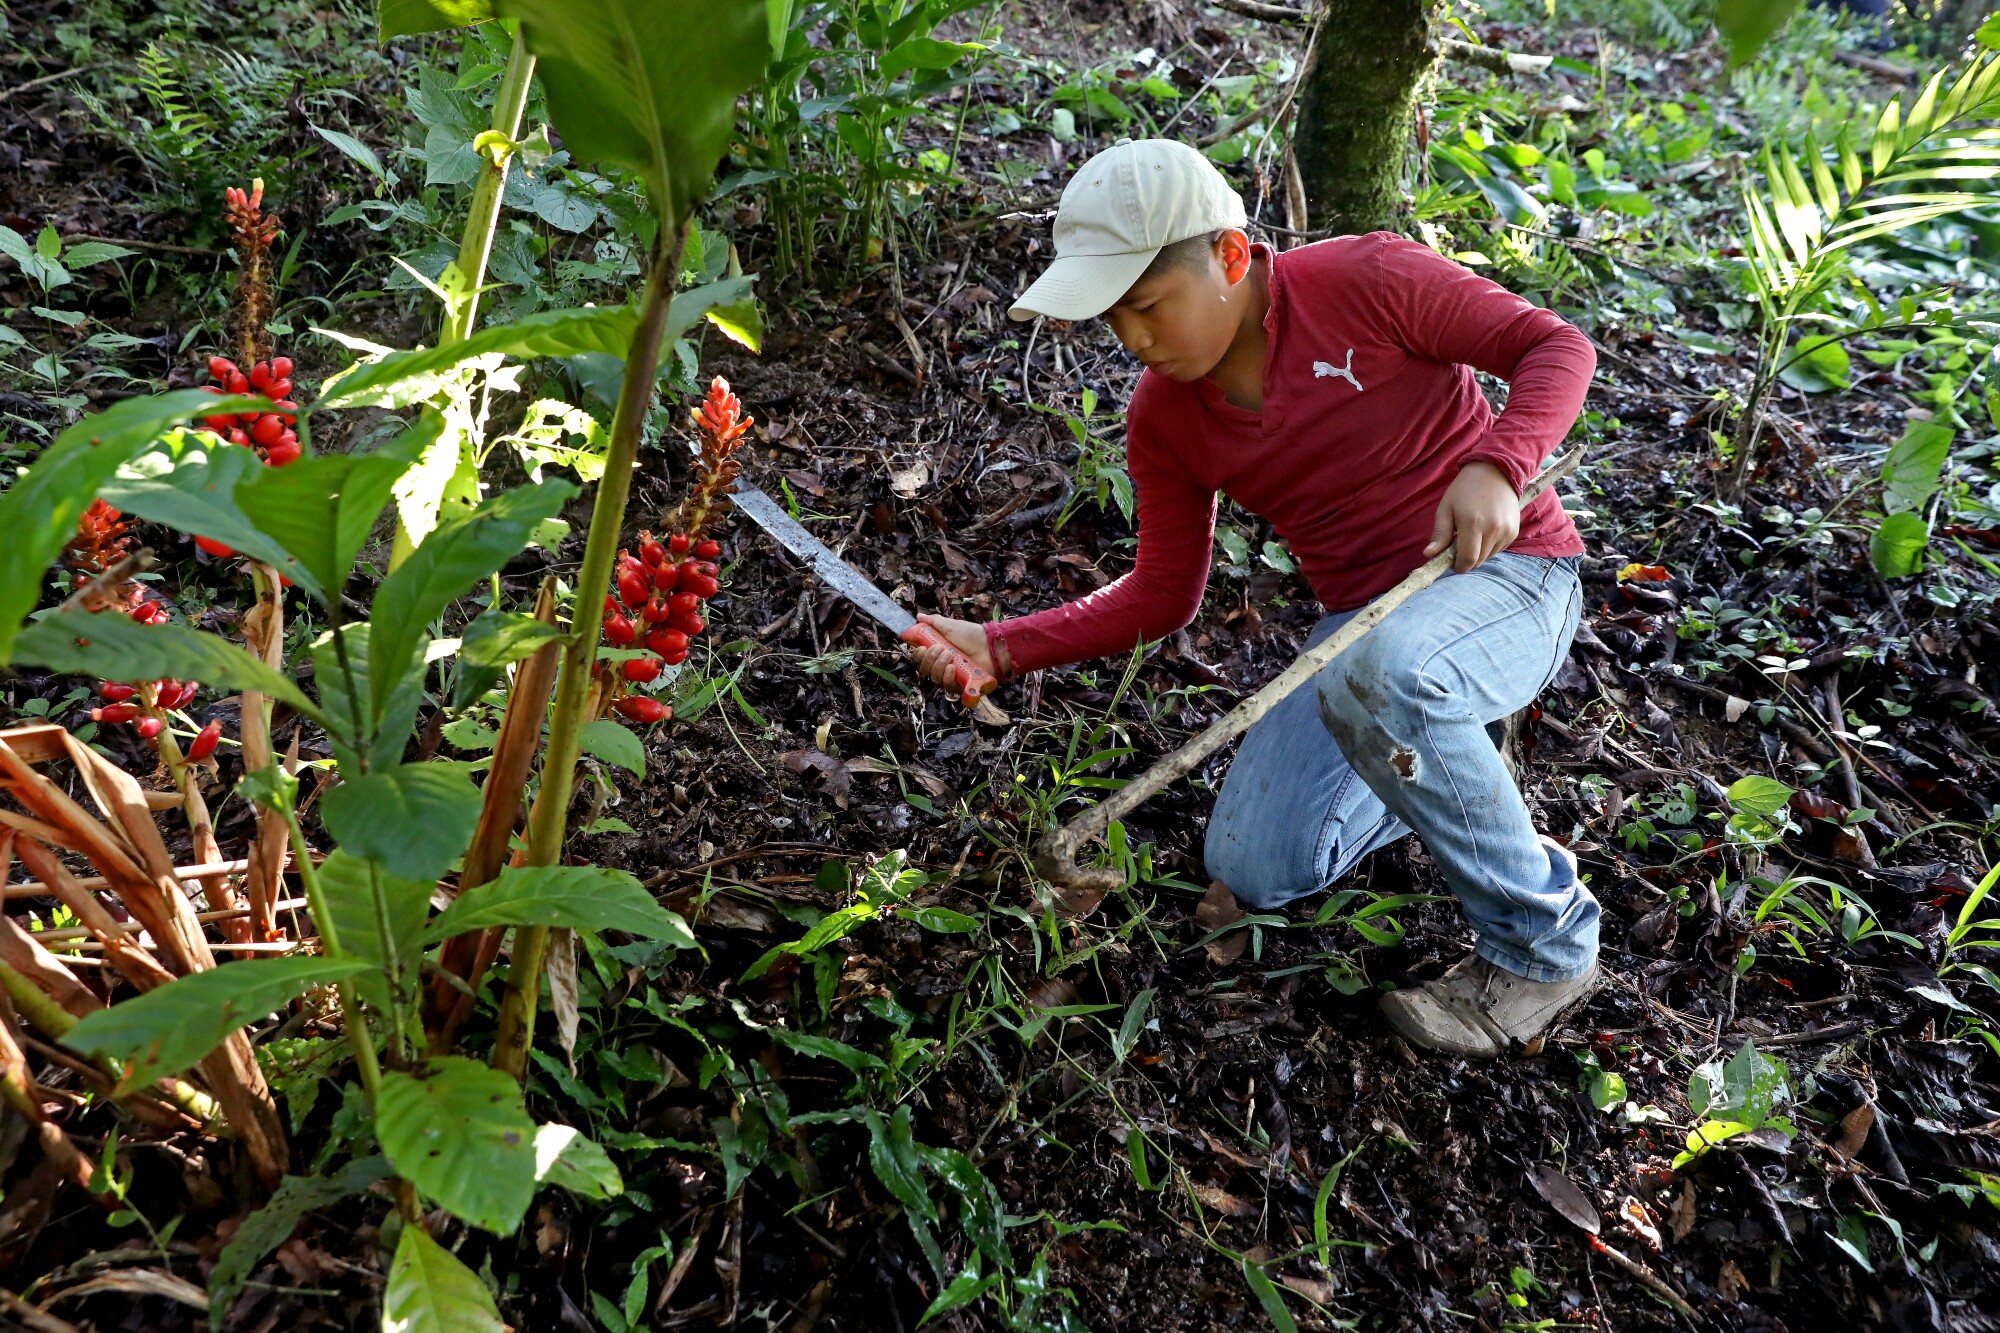 Bryan Metzhua, 12, helps clear weeds on a farm in southern Mexico.